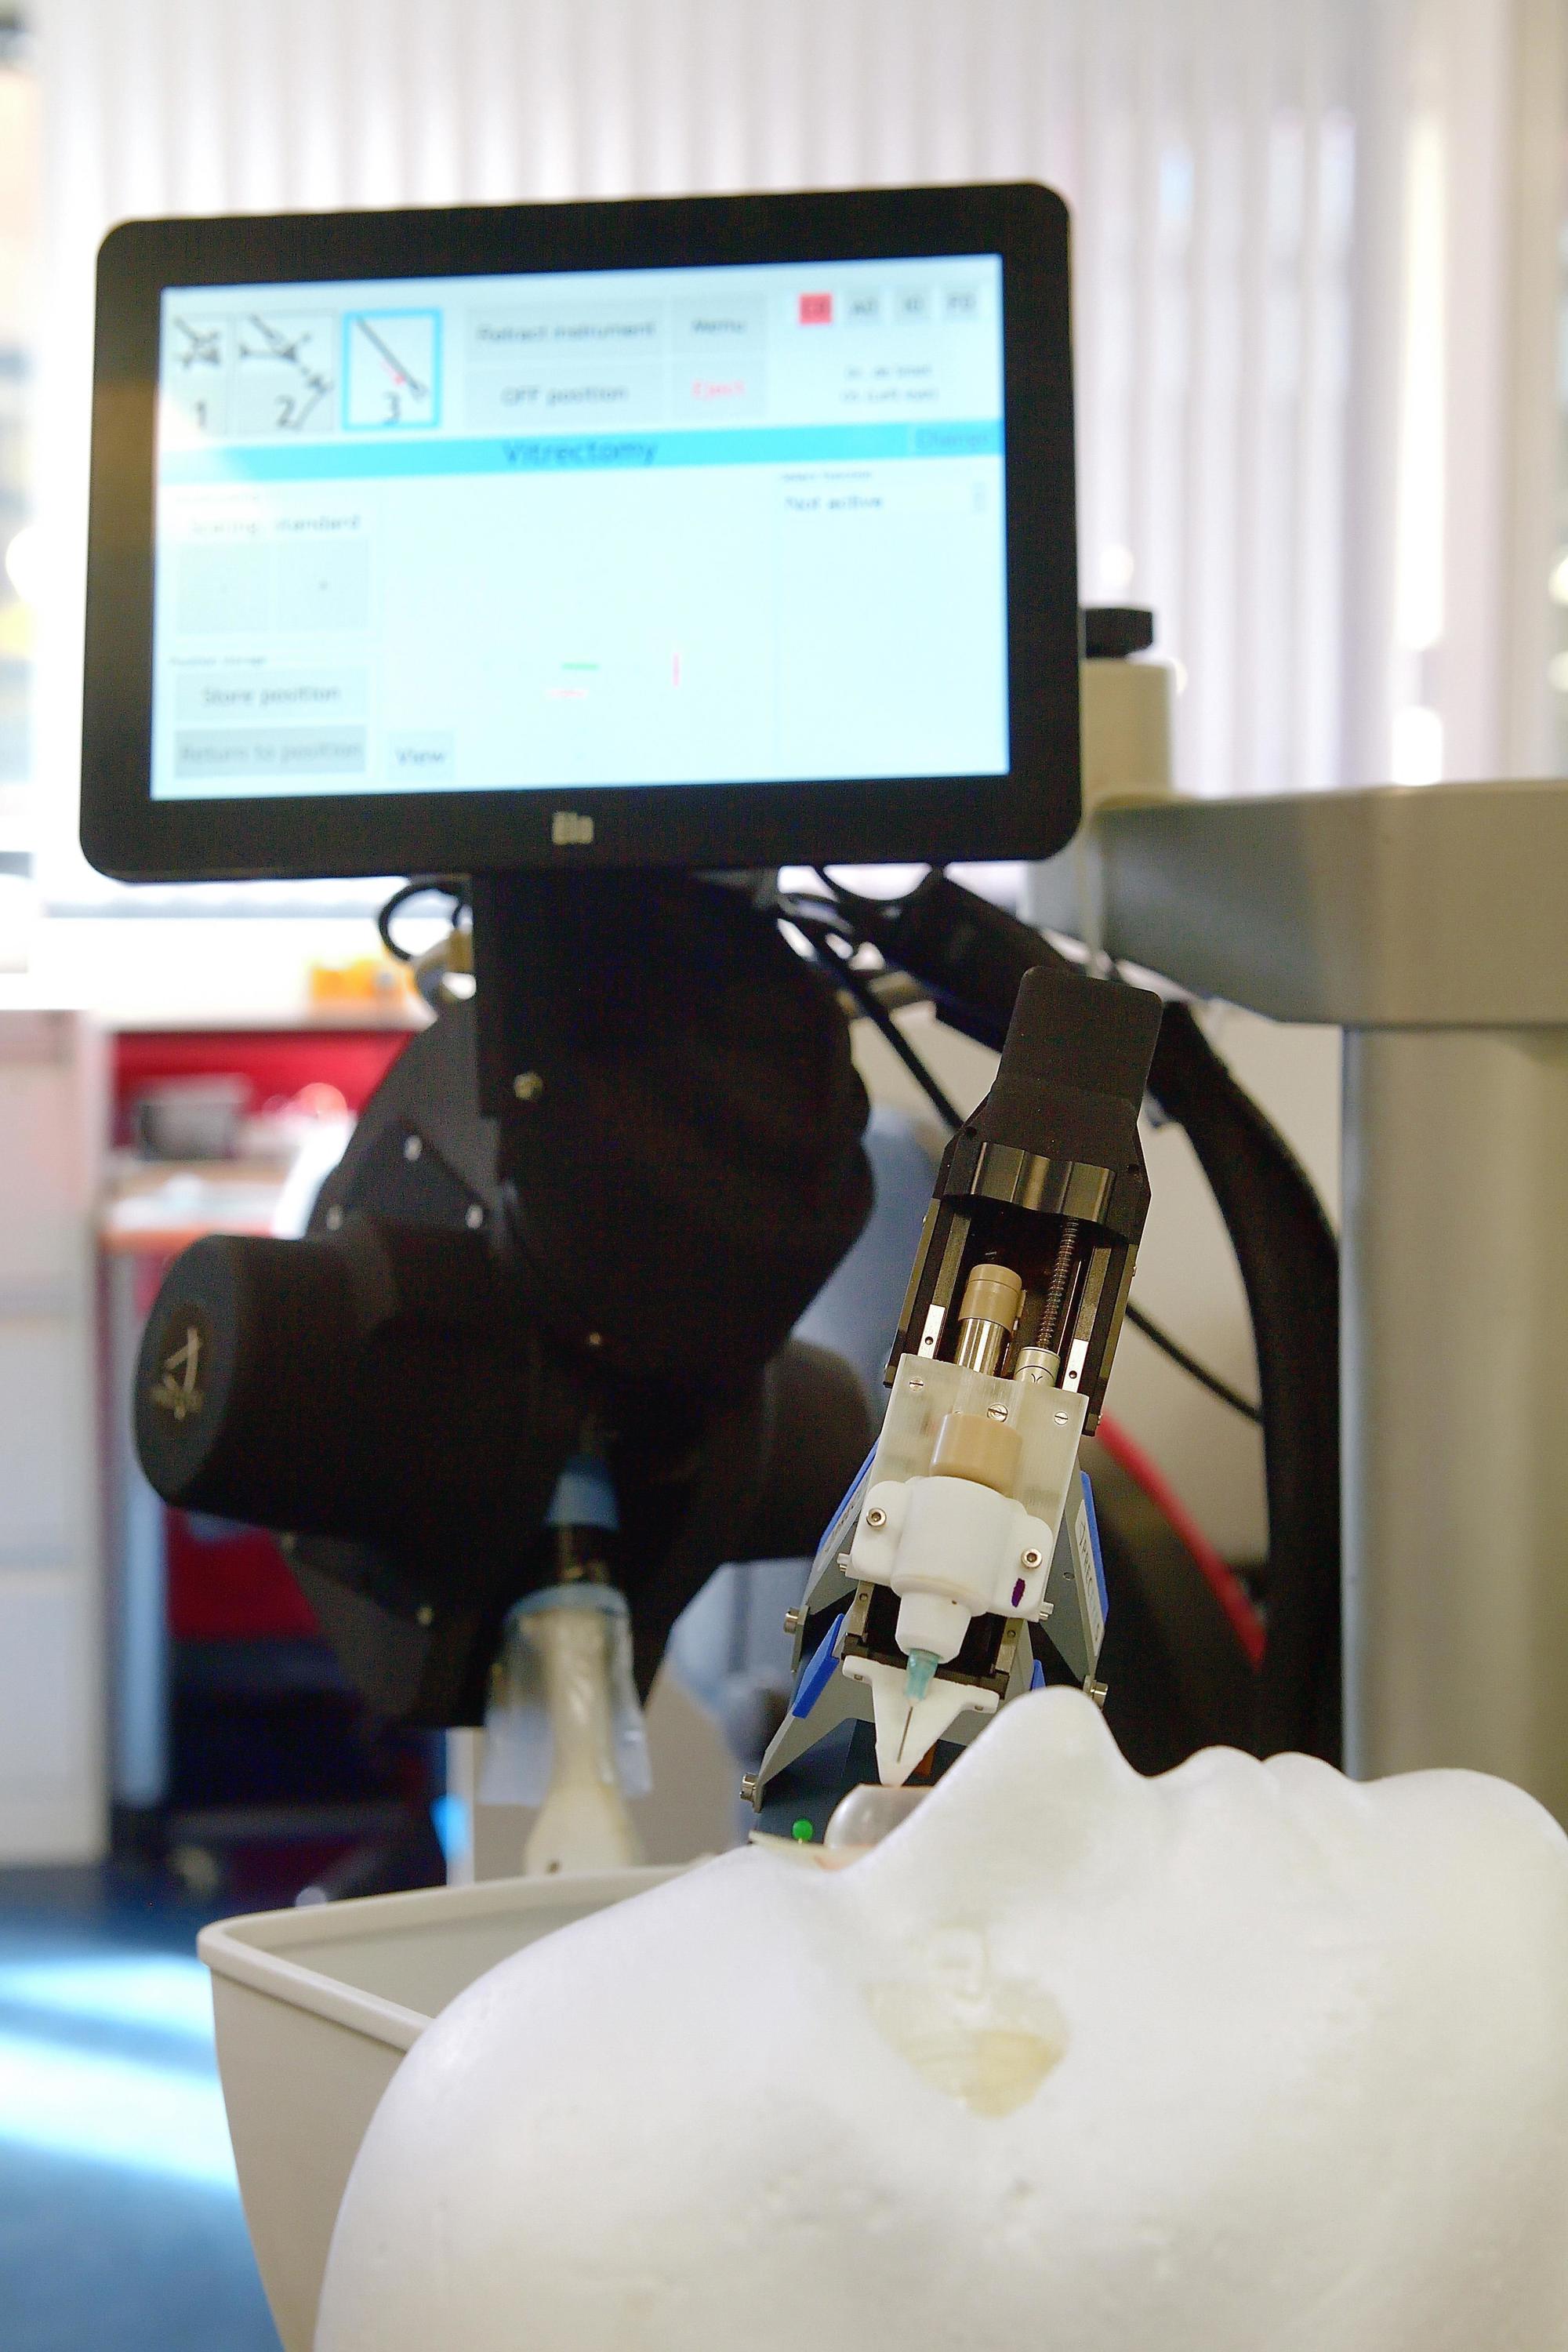 The Preceyes robot is a reassurance for every eye patient